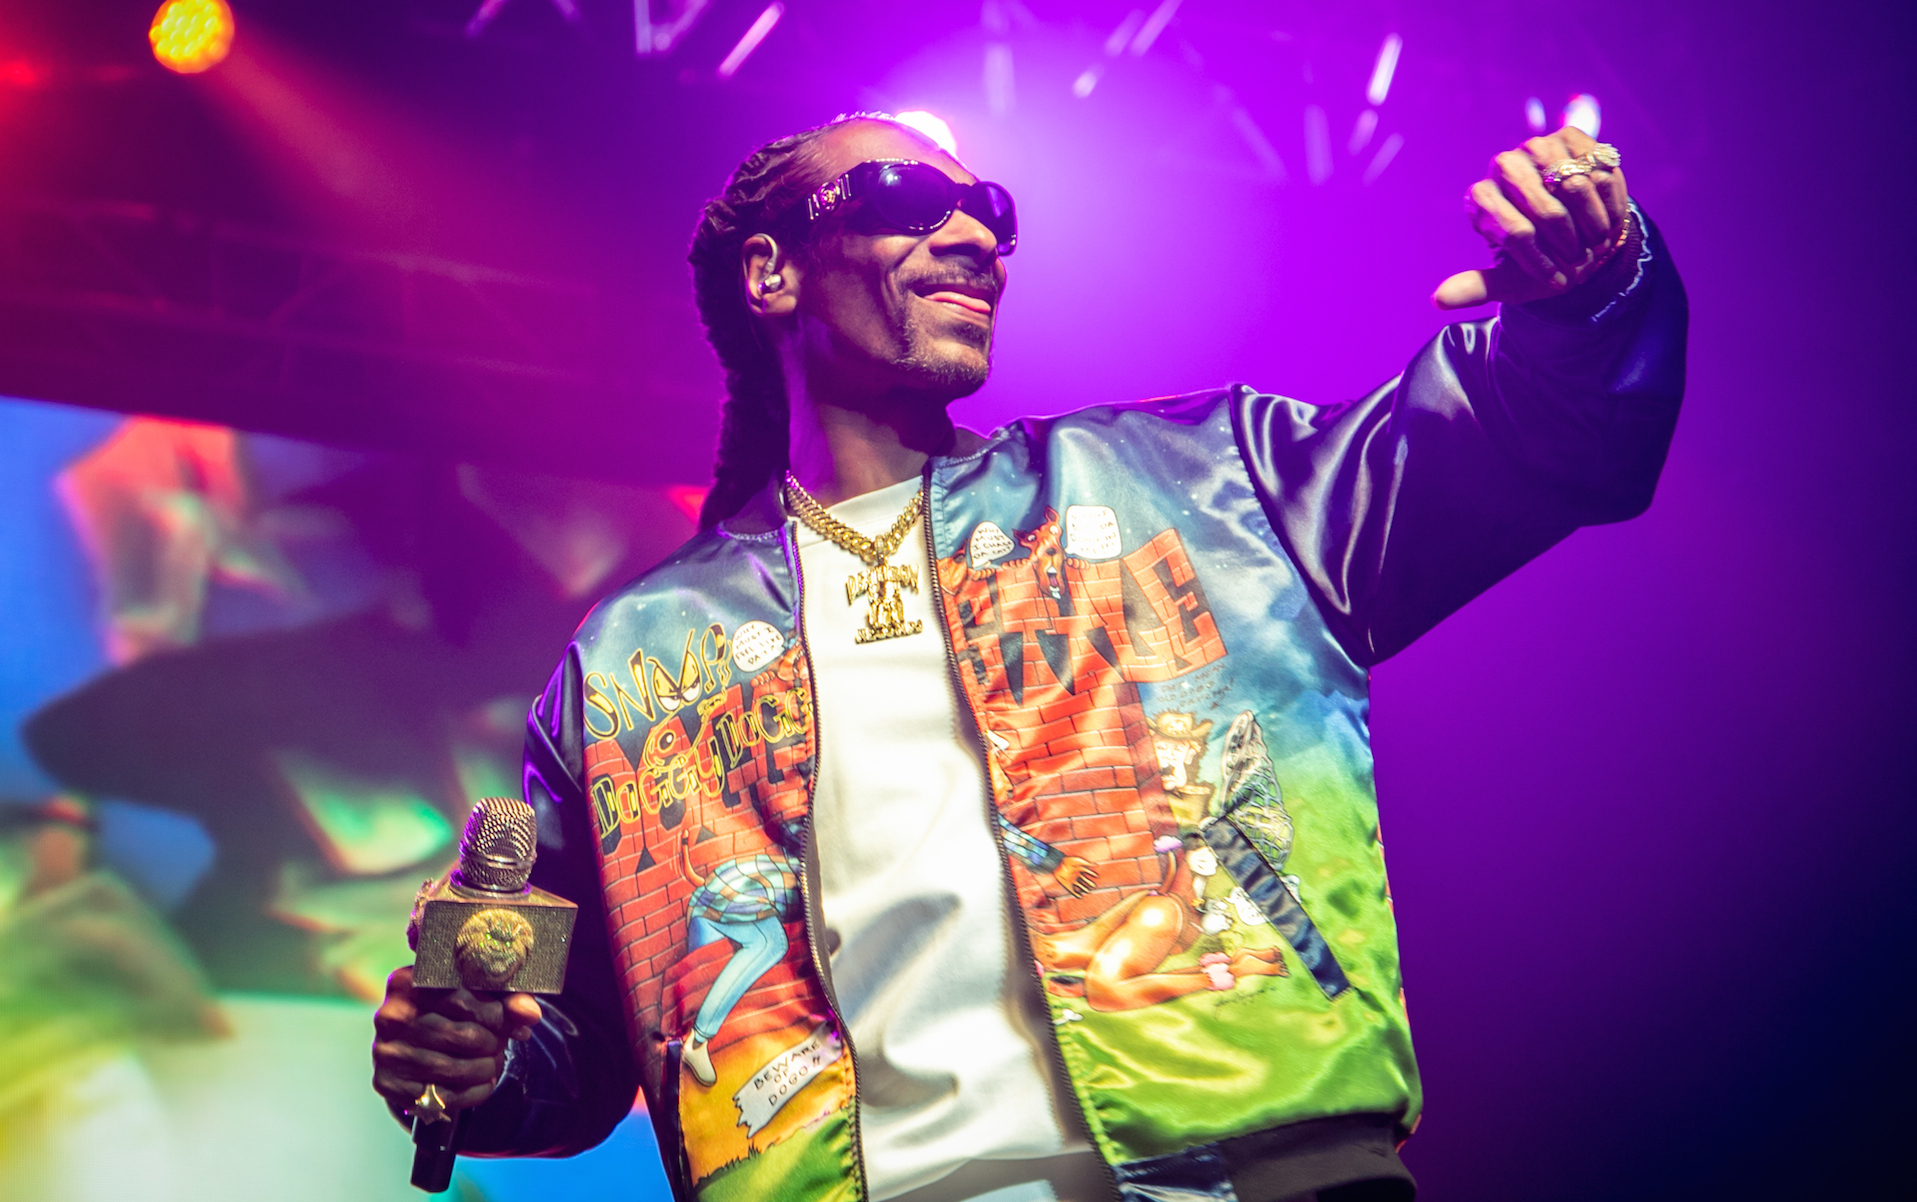 Snoop Dogg patents his own brand of hotdogs “Snoop Doggs”